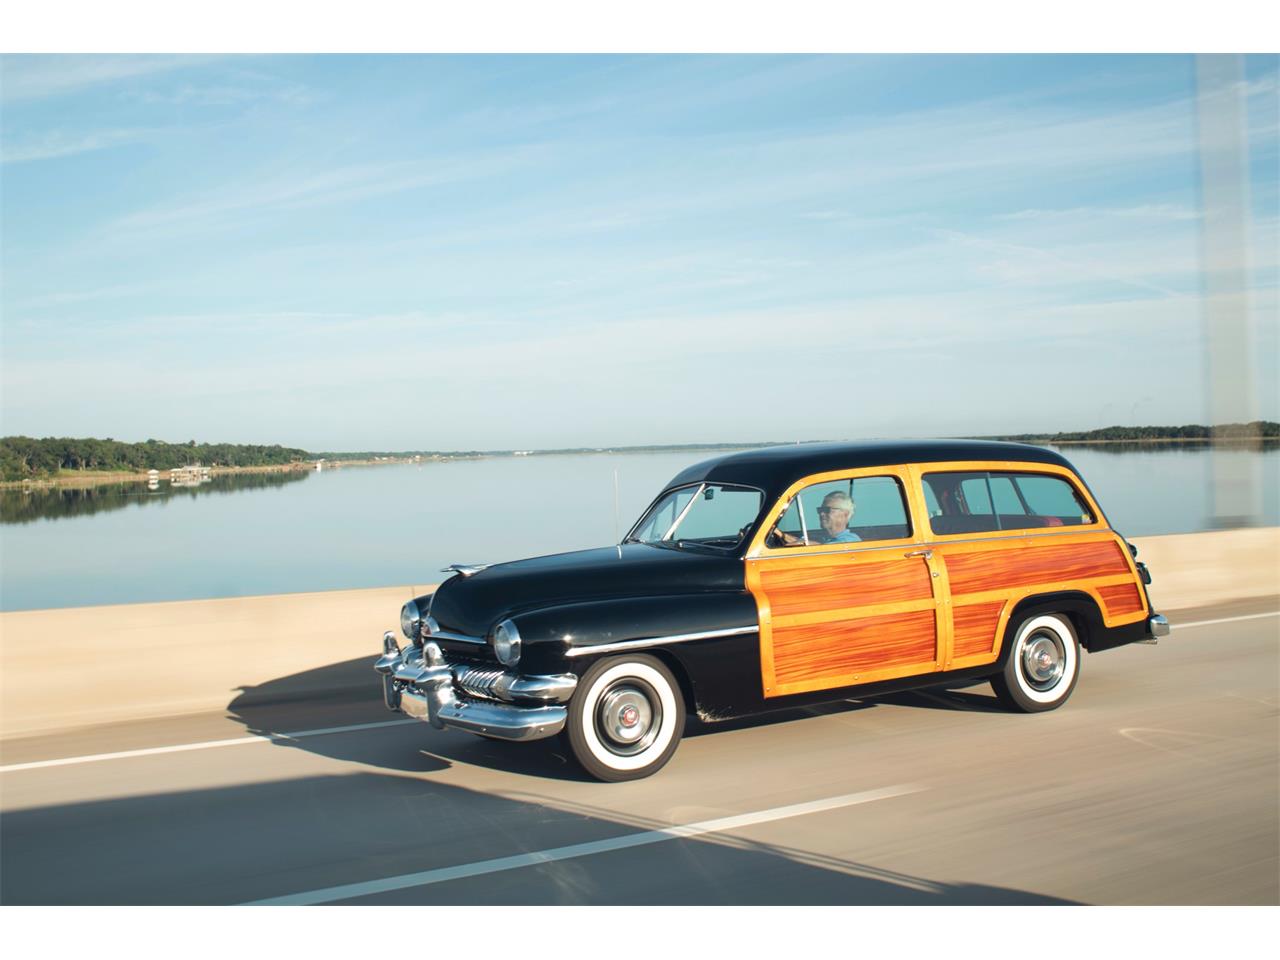 For Sale at Auction: 1951 Mercury Woody Wagon for sale in Jacksonville, FL